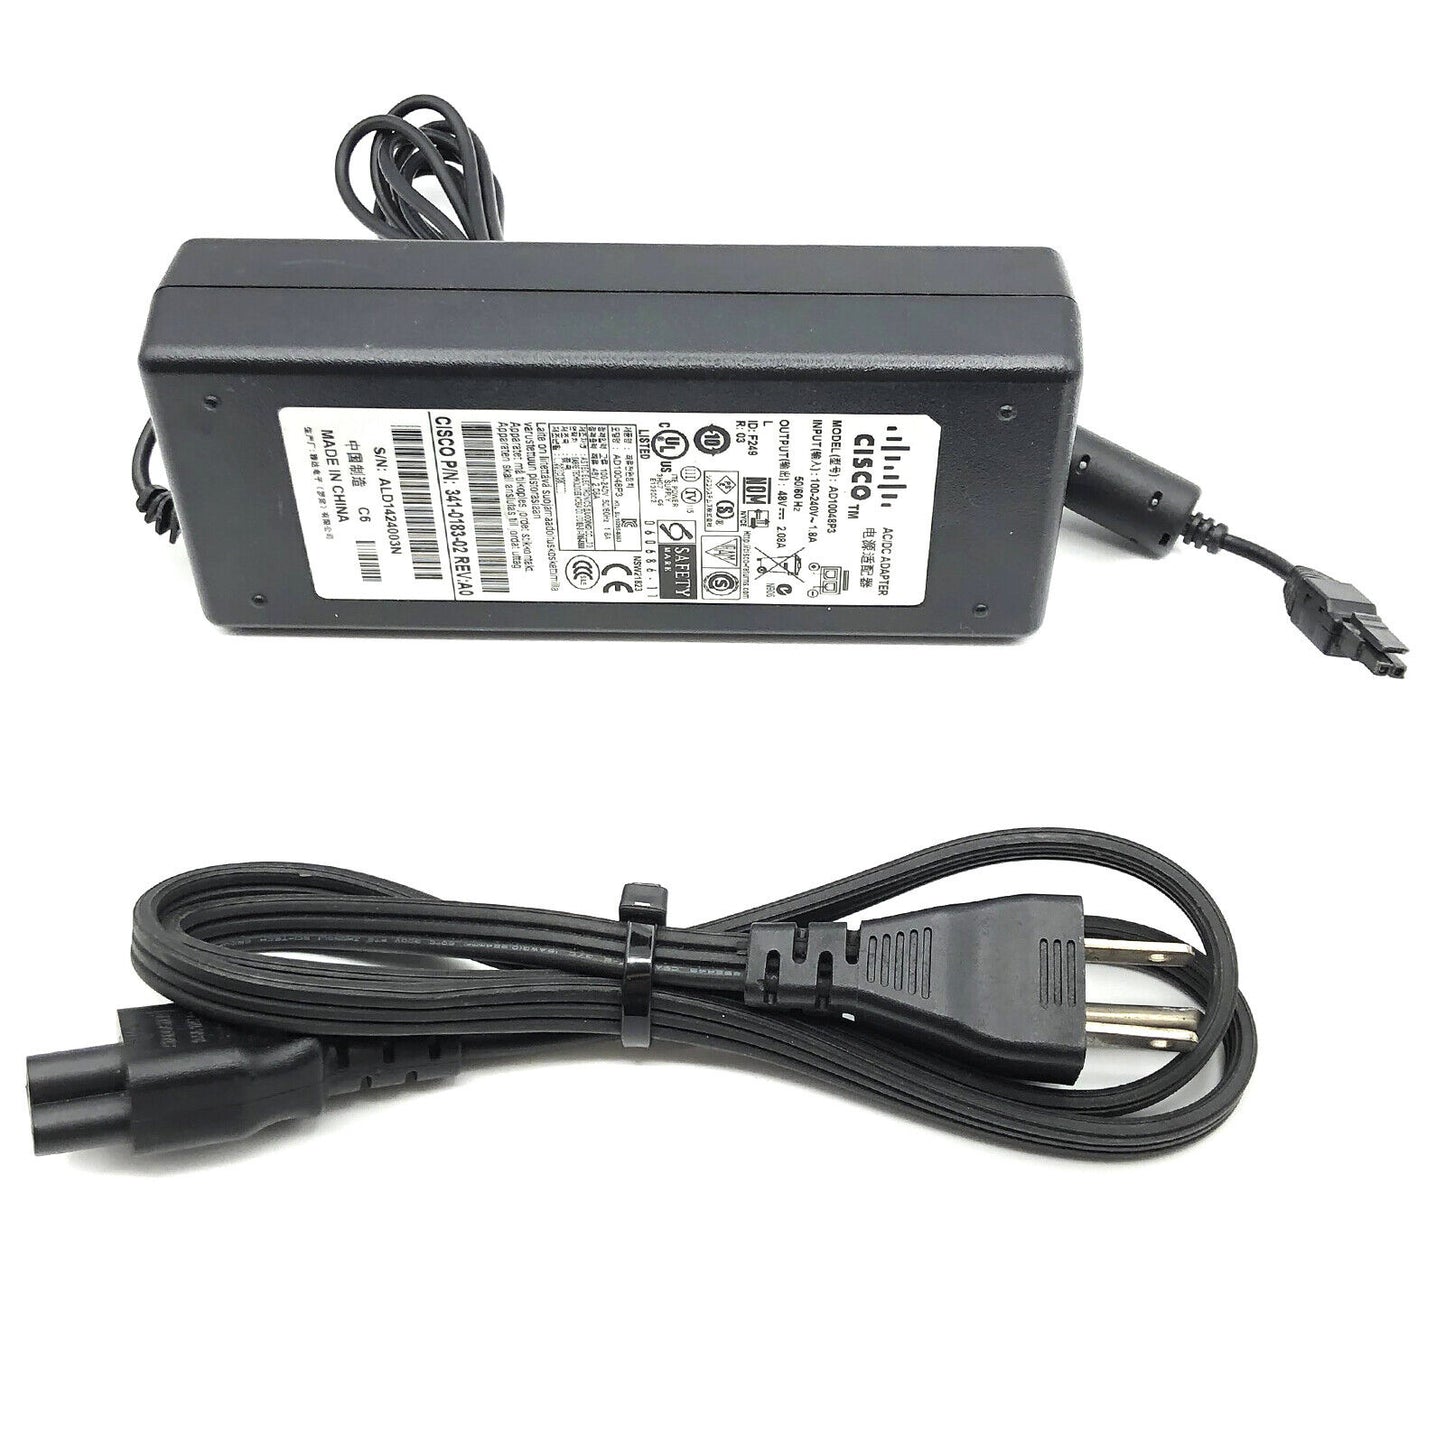 OEM Cisco ASA5505 48V AC Power Adapter Firewall Router Charger w/ cord